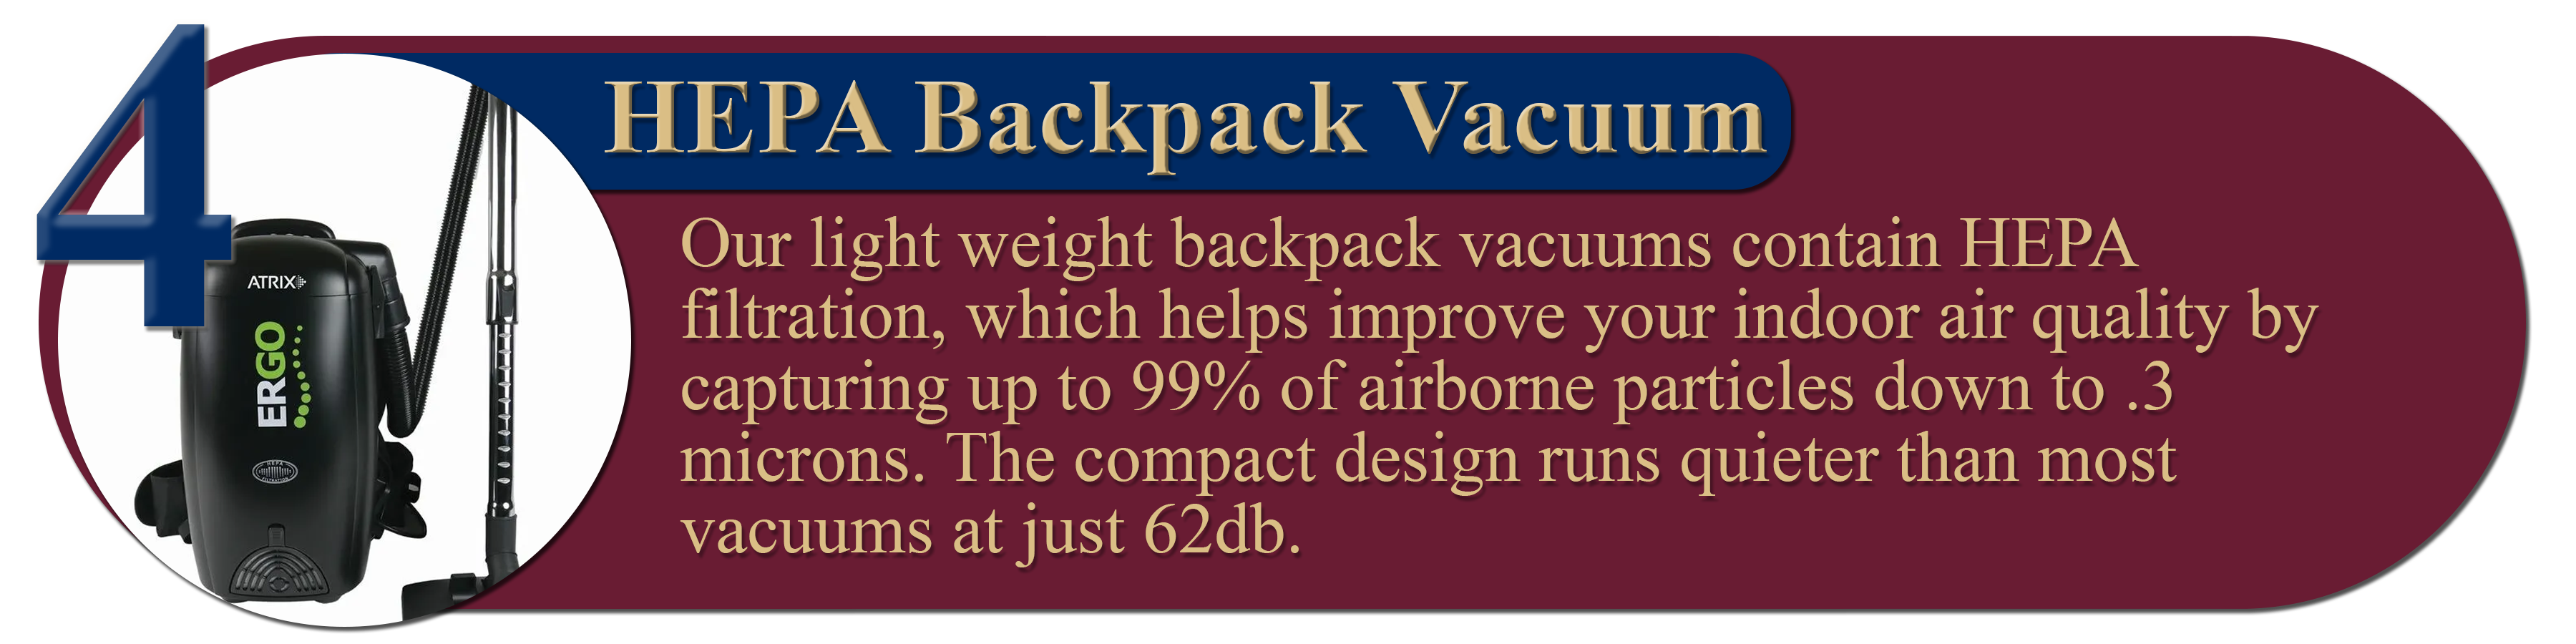 4. HEPA Backpack Vacuum: Our light weight backpack vacuums contain HEPA filtration, which helps improve your indoor air quality by capturing up to 99% of airborne particles down to .3 microns. The compact design runs quieter than most vacuums at just 62db.